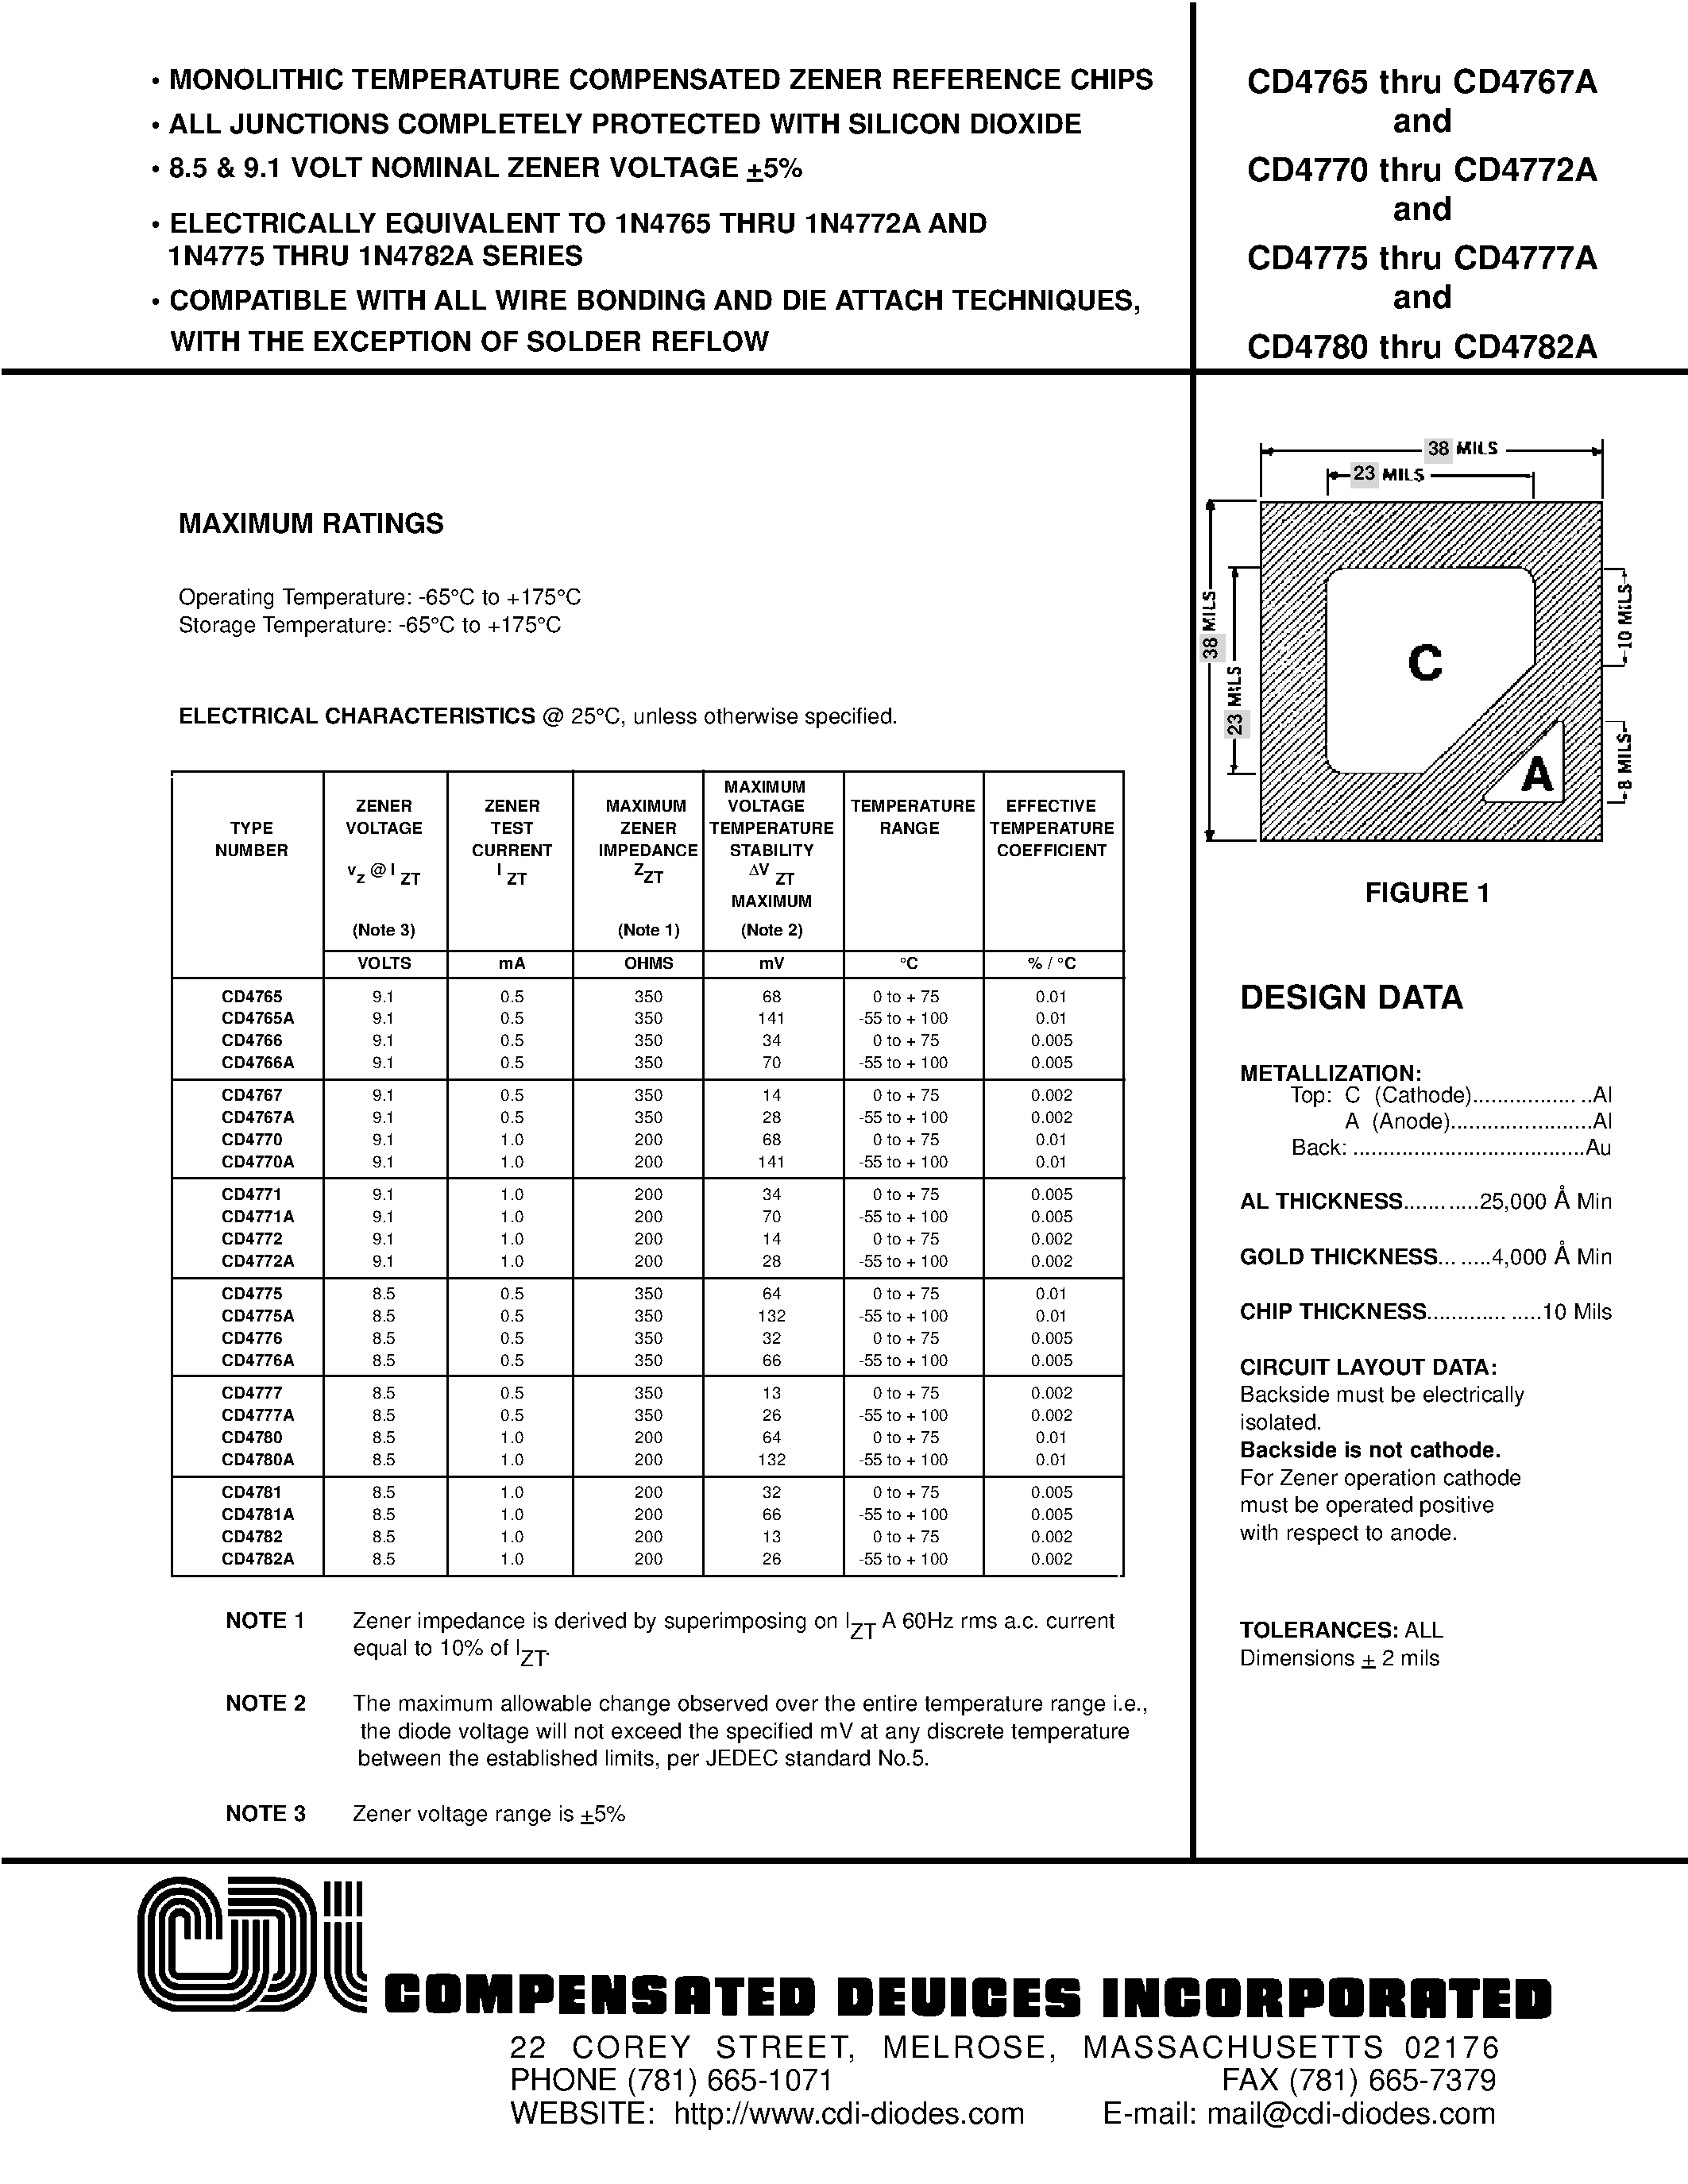 Datasheet CD4765A - MONOLITHIC TEMPERATURE COMPENSATED ZENER REFERENCE CHIPS page 1